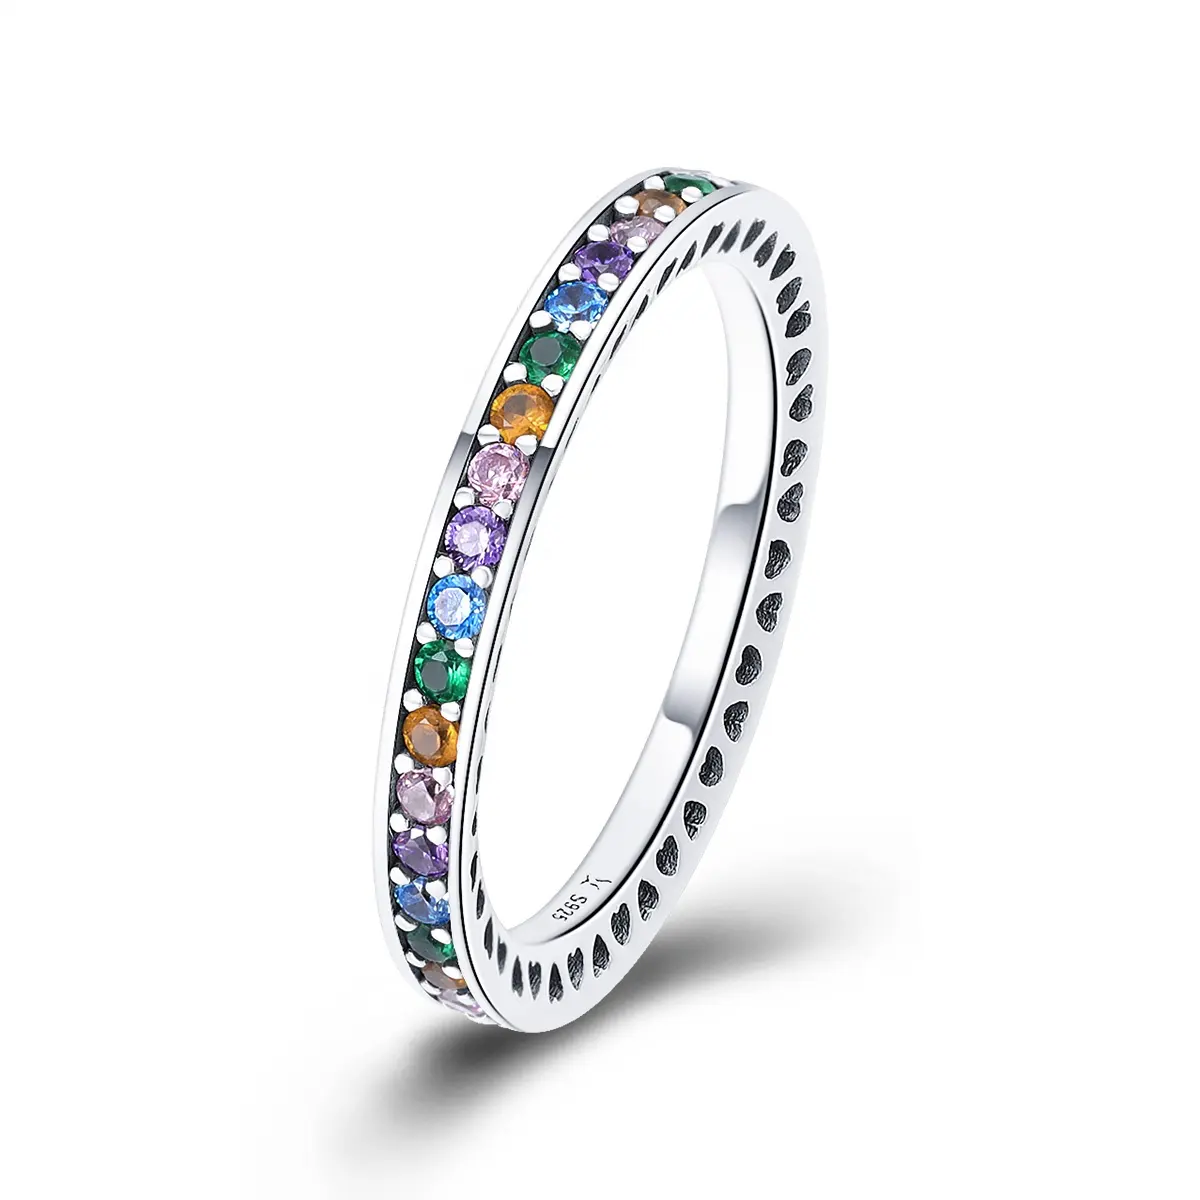 in stock colorful birthstone wholesale wedding rings Channel Retro Cz Zirconia Topaz Setting 925 Sterling Silver Rainbow Ring